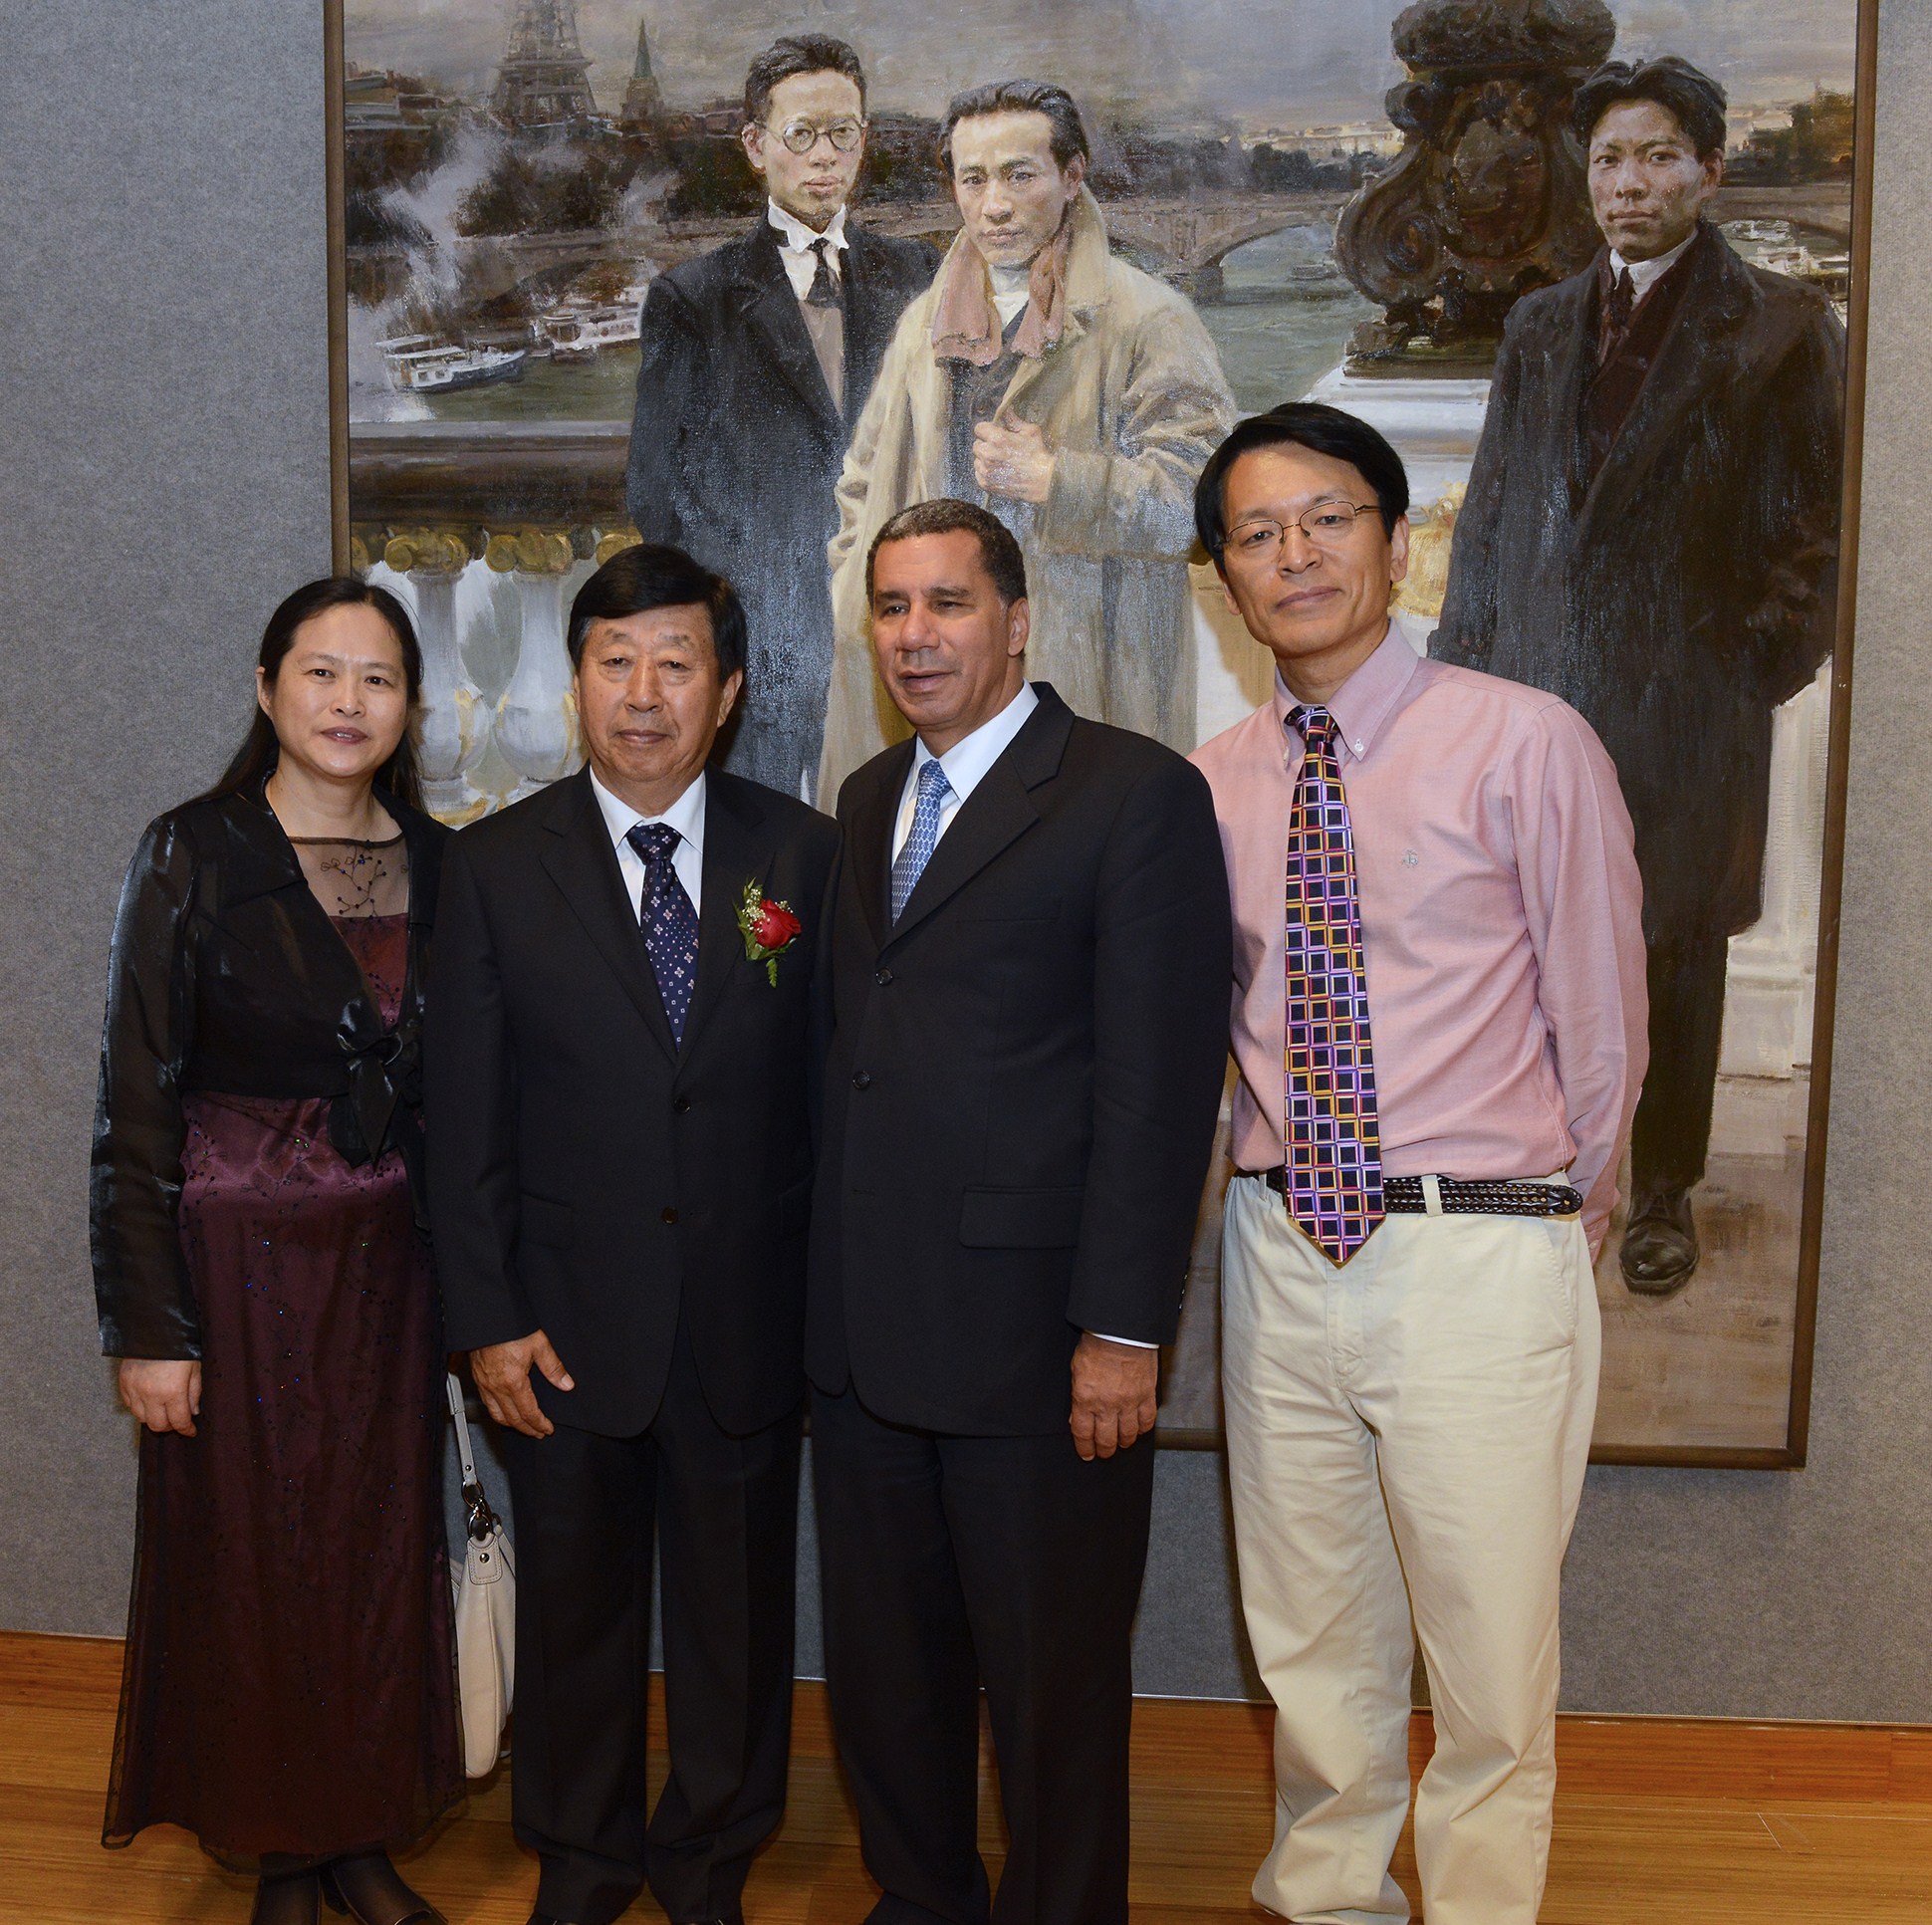 Former New York Governor David Paterson visits 12th China National Exhibition of Fine Arts